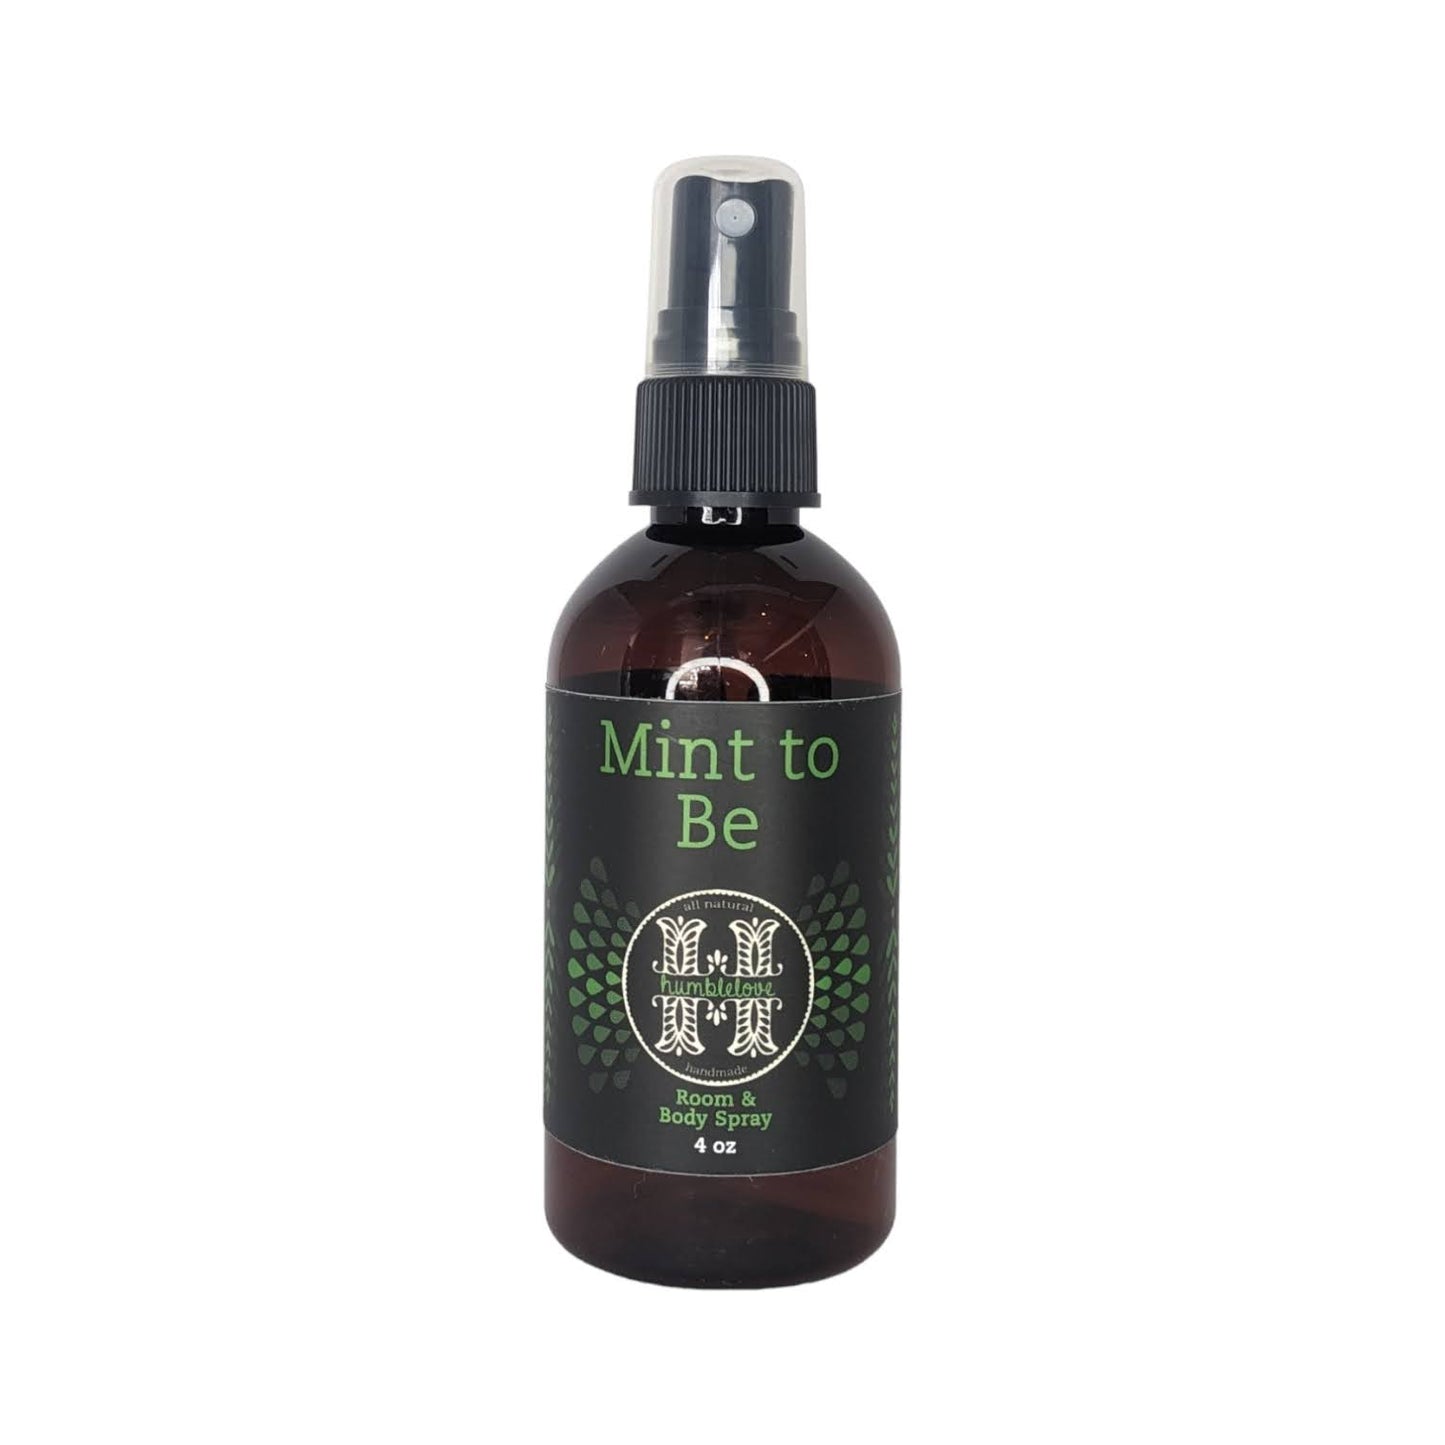 Mint to Be Room and Body Spray - 4 oz